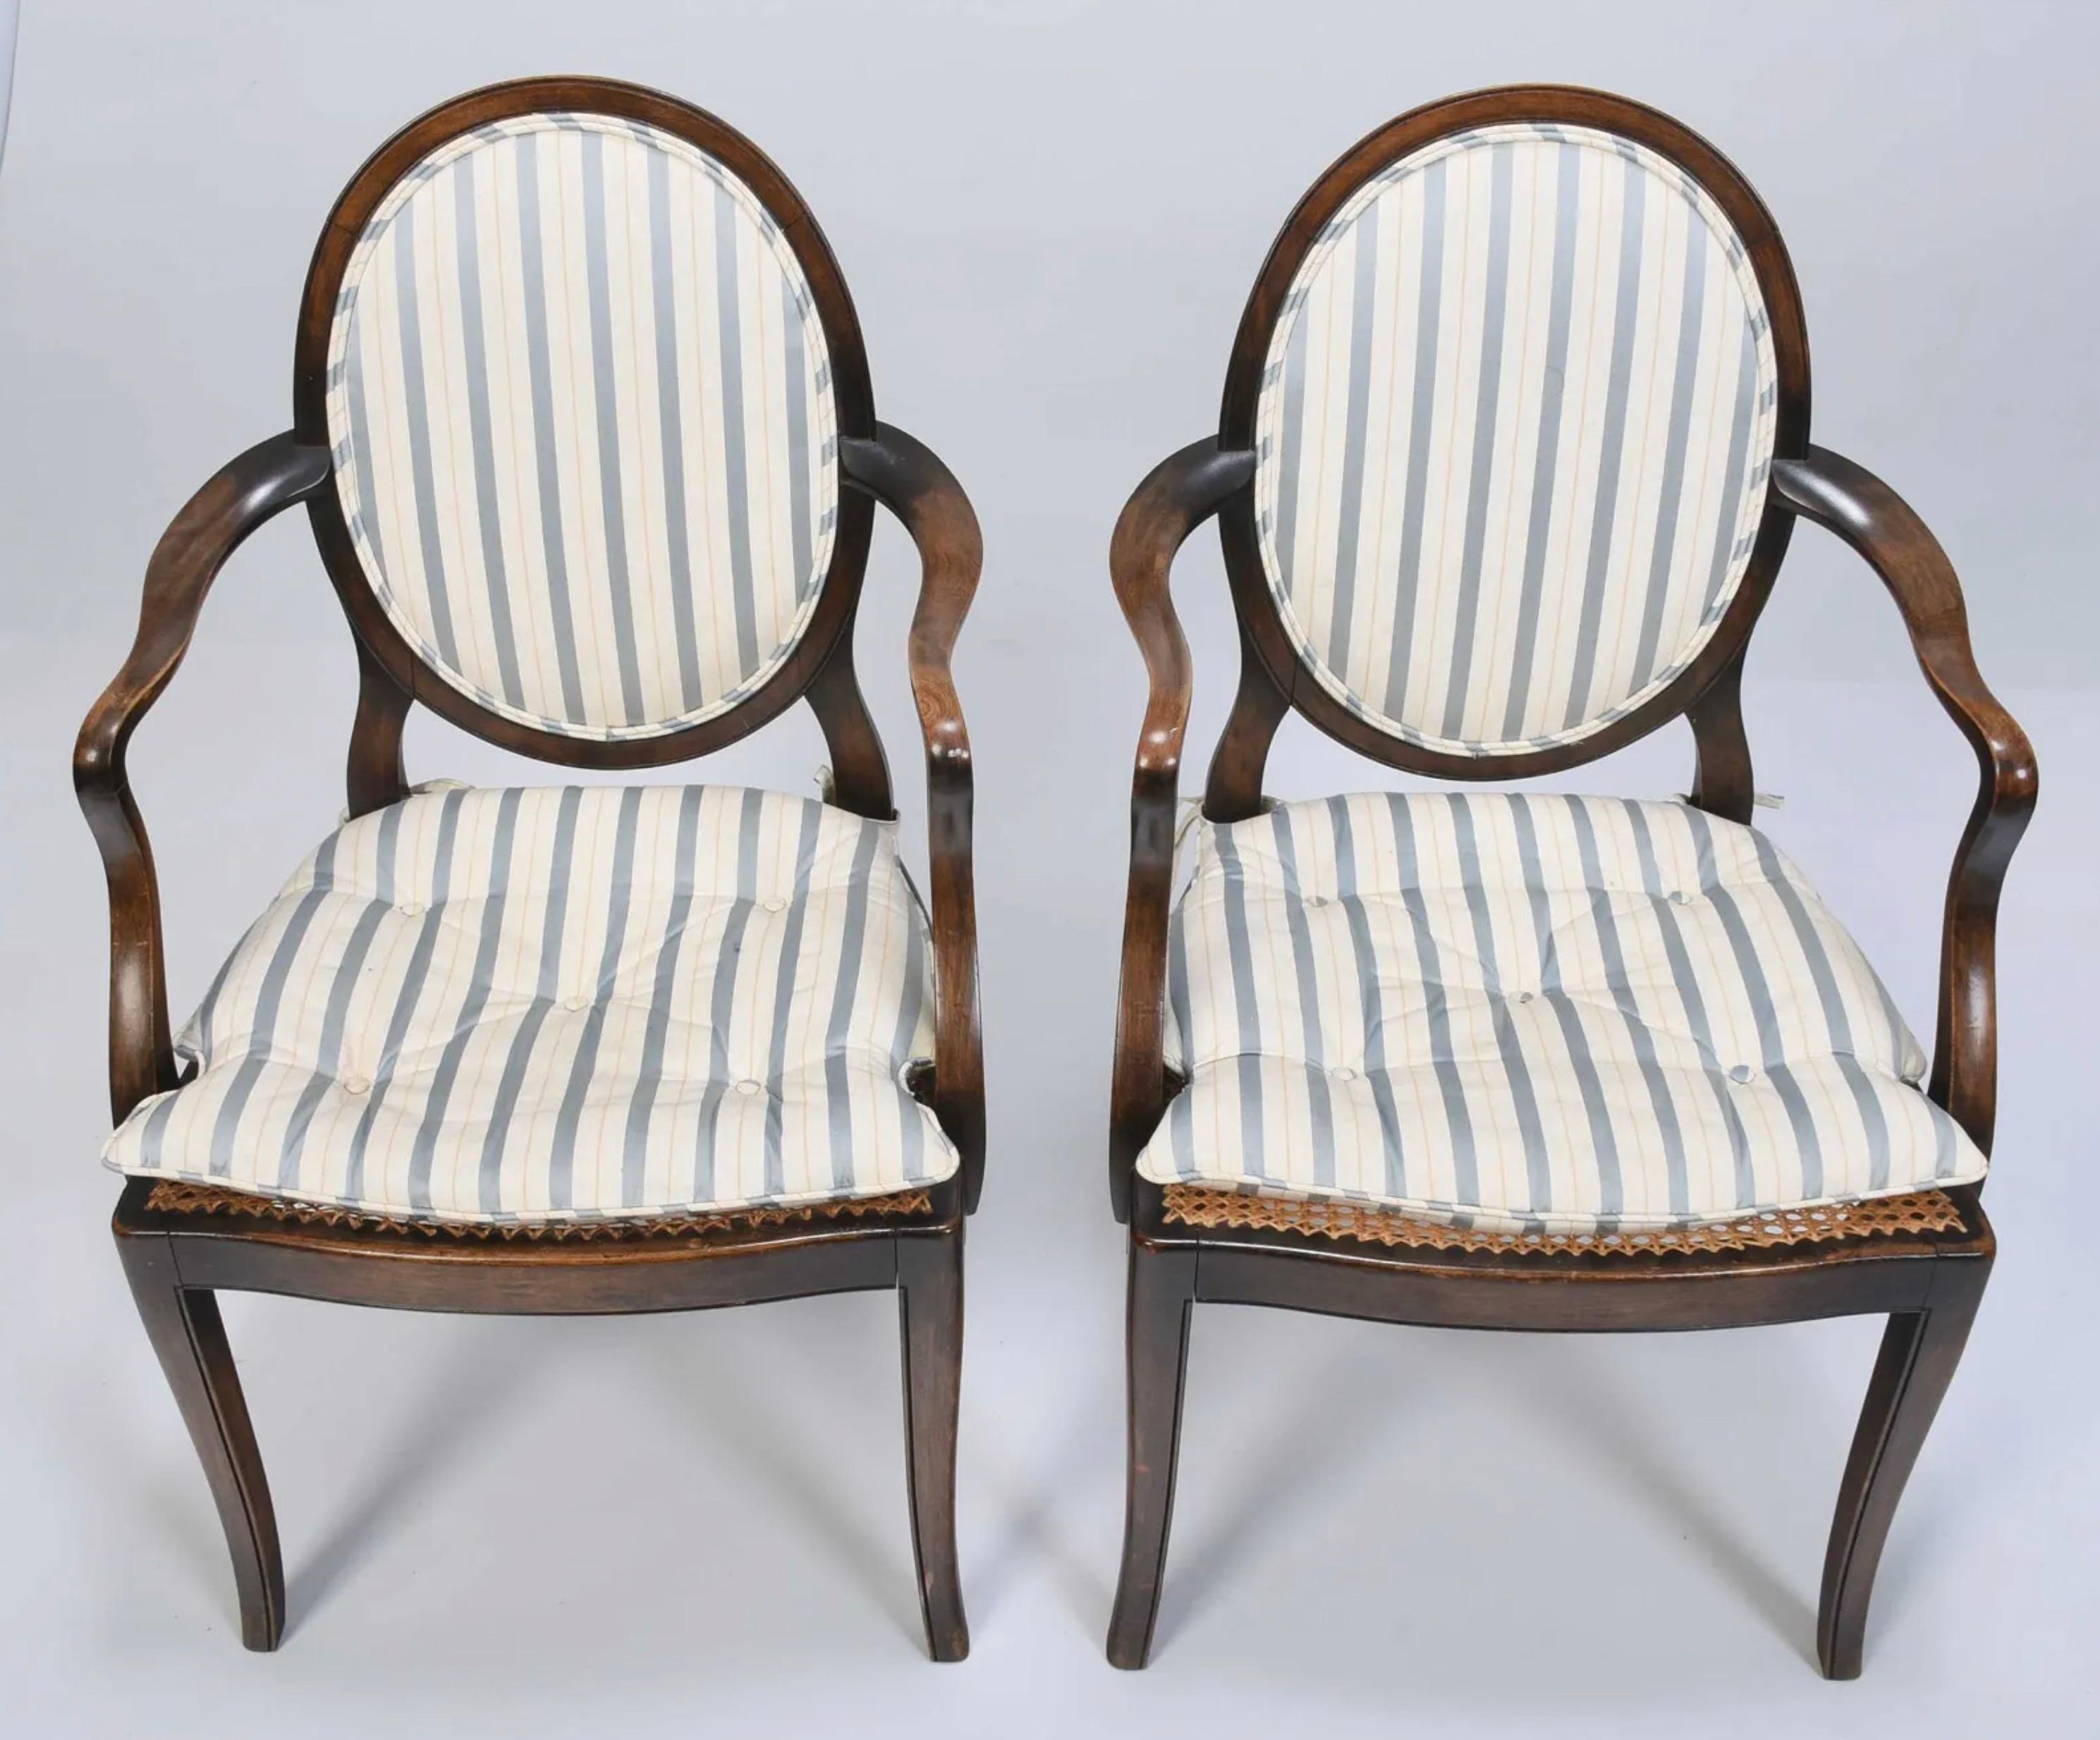 20th century, upholstered oval back, shaped arms, caned seat with loose cushions, tapered legs, 36-1/2 x 21-1/2 x 18 in.

Provenance: Property from the Collection of Ambassador Bonnie McElveen-Hunter